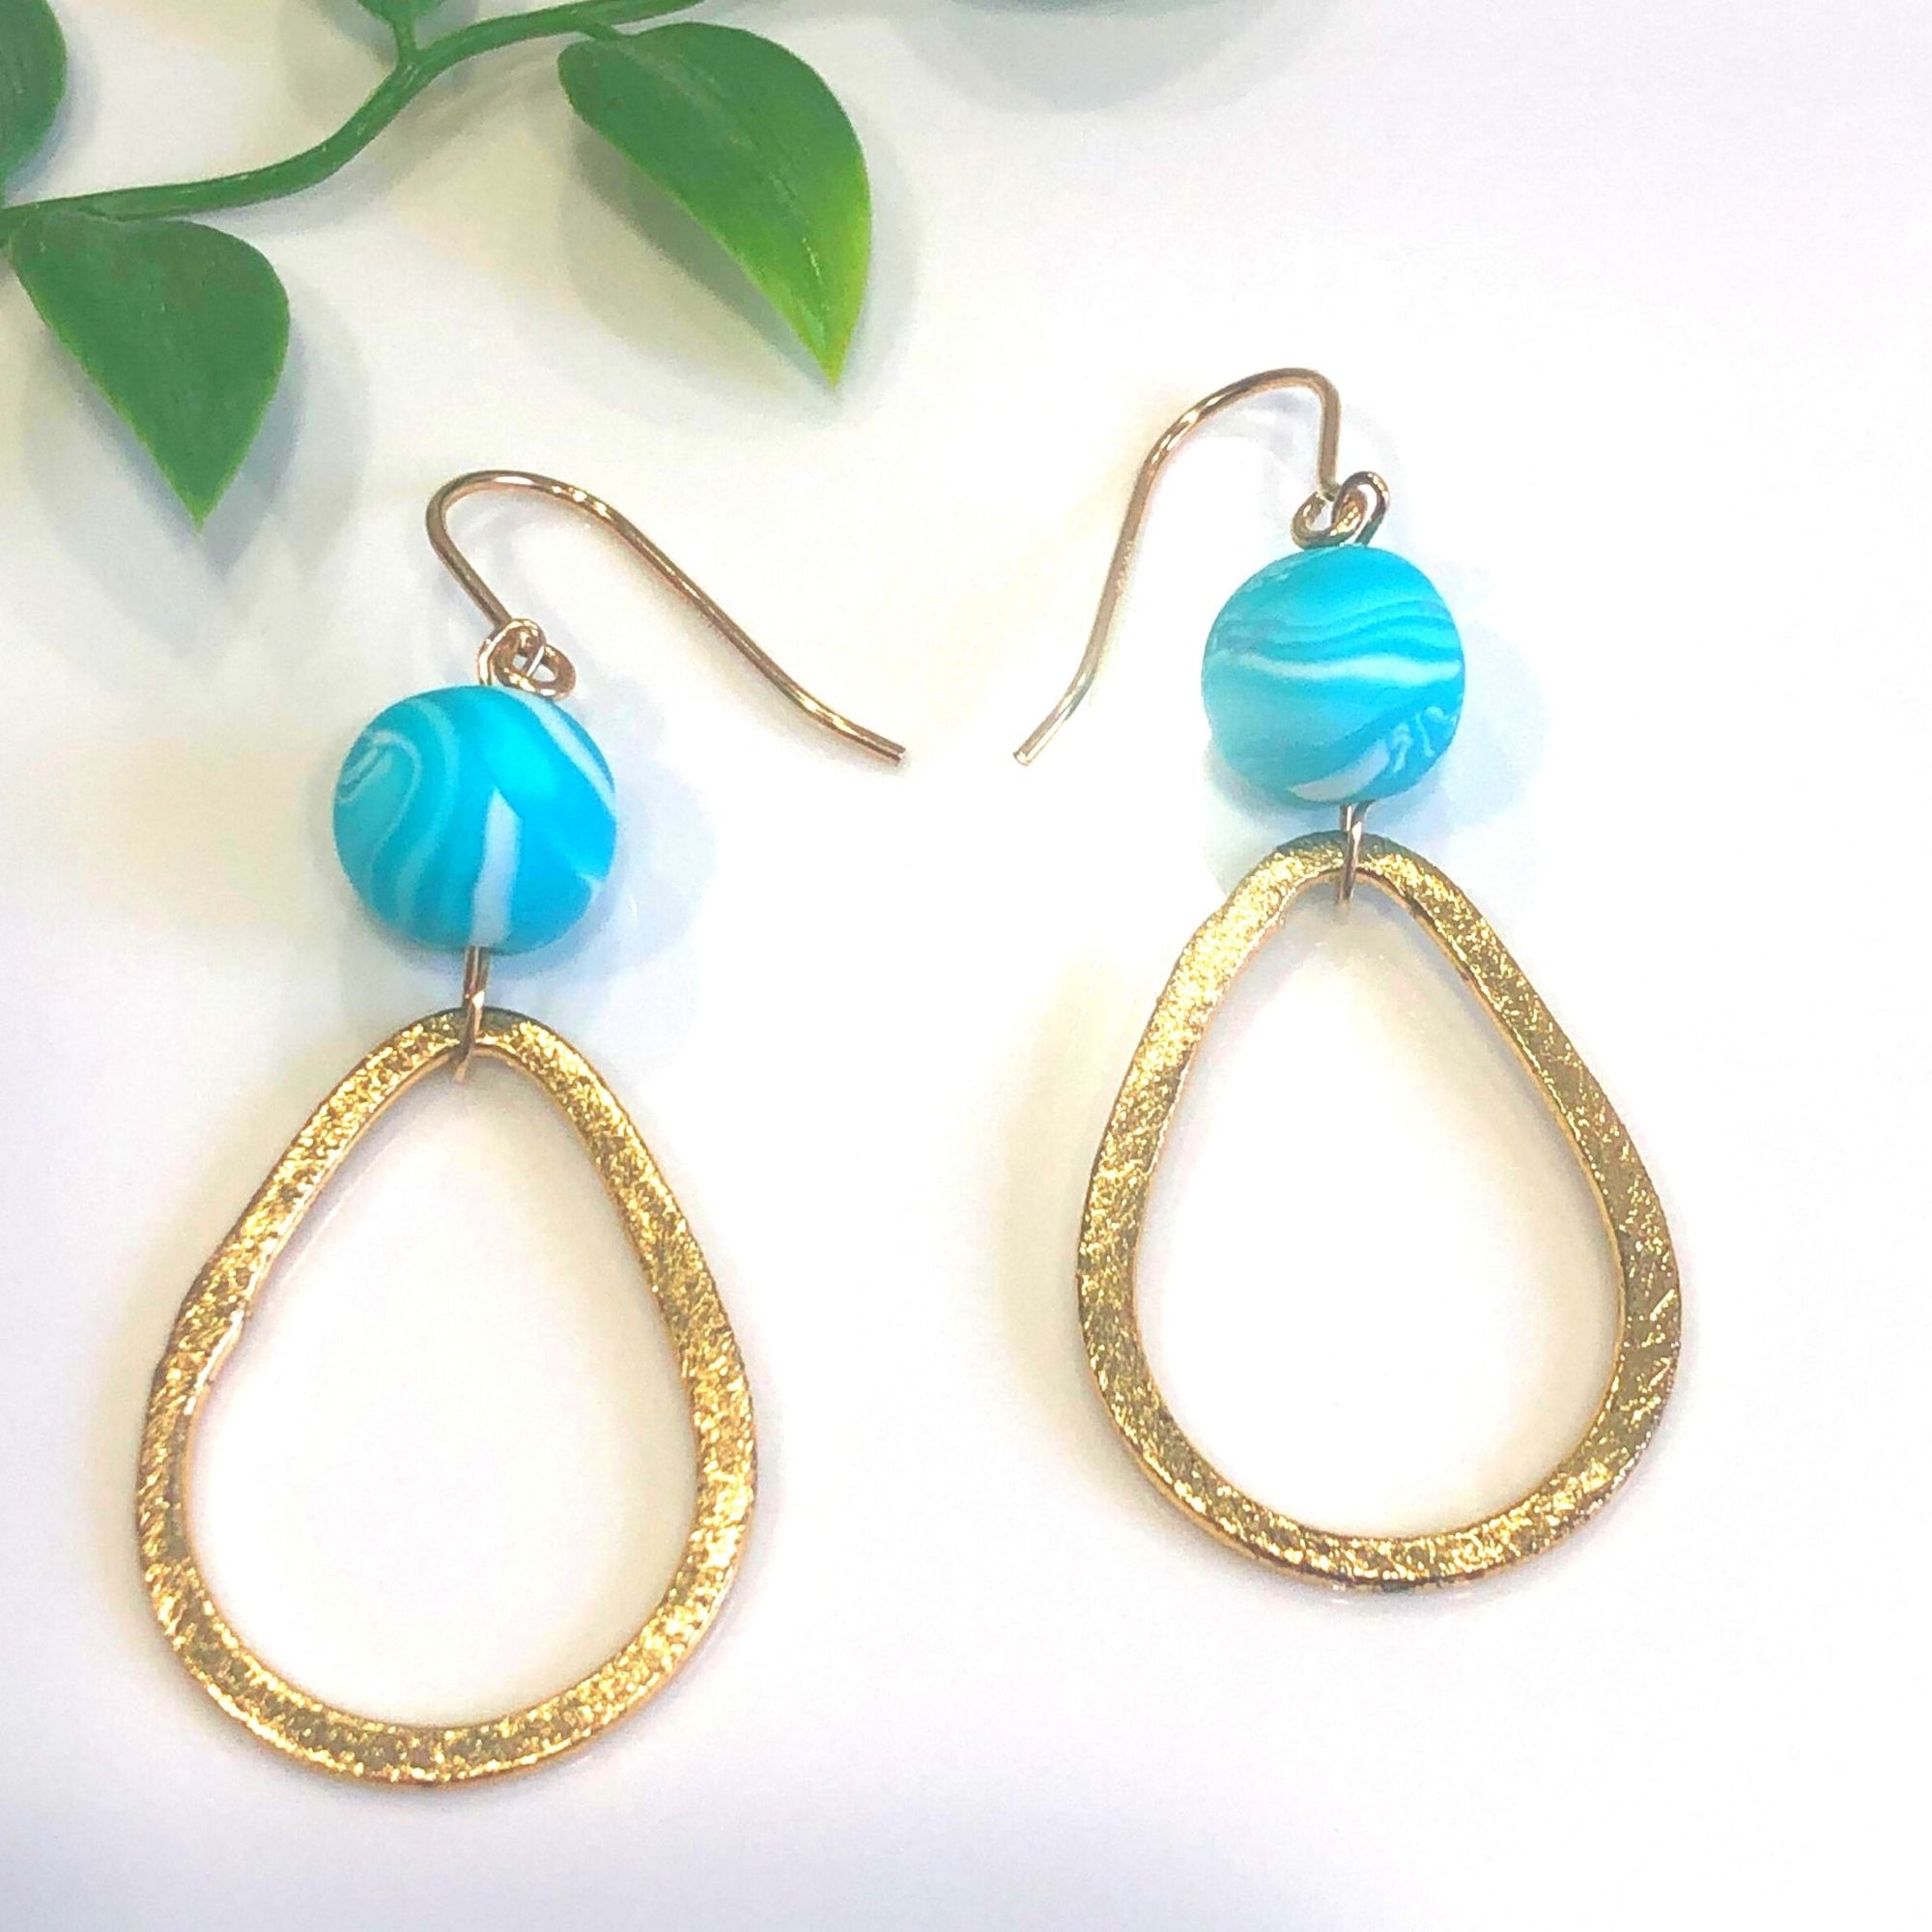 STUNNING ONE OF A KIND HANDCRAFTED EARRINGS | UNIQUE MARINA-RA BEADS ERDT100